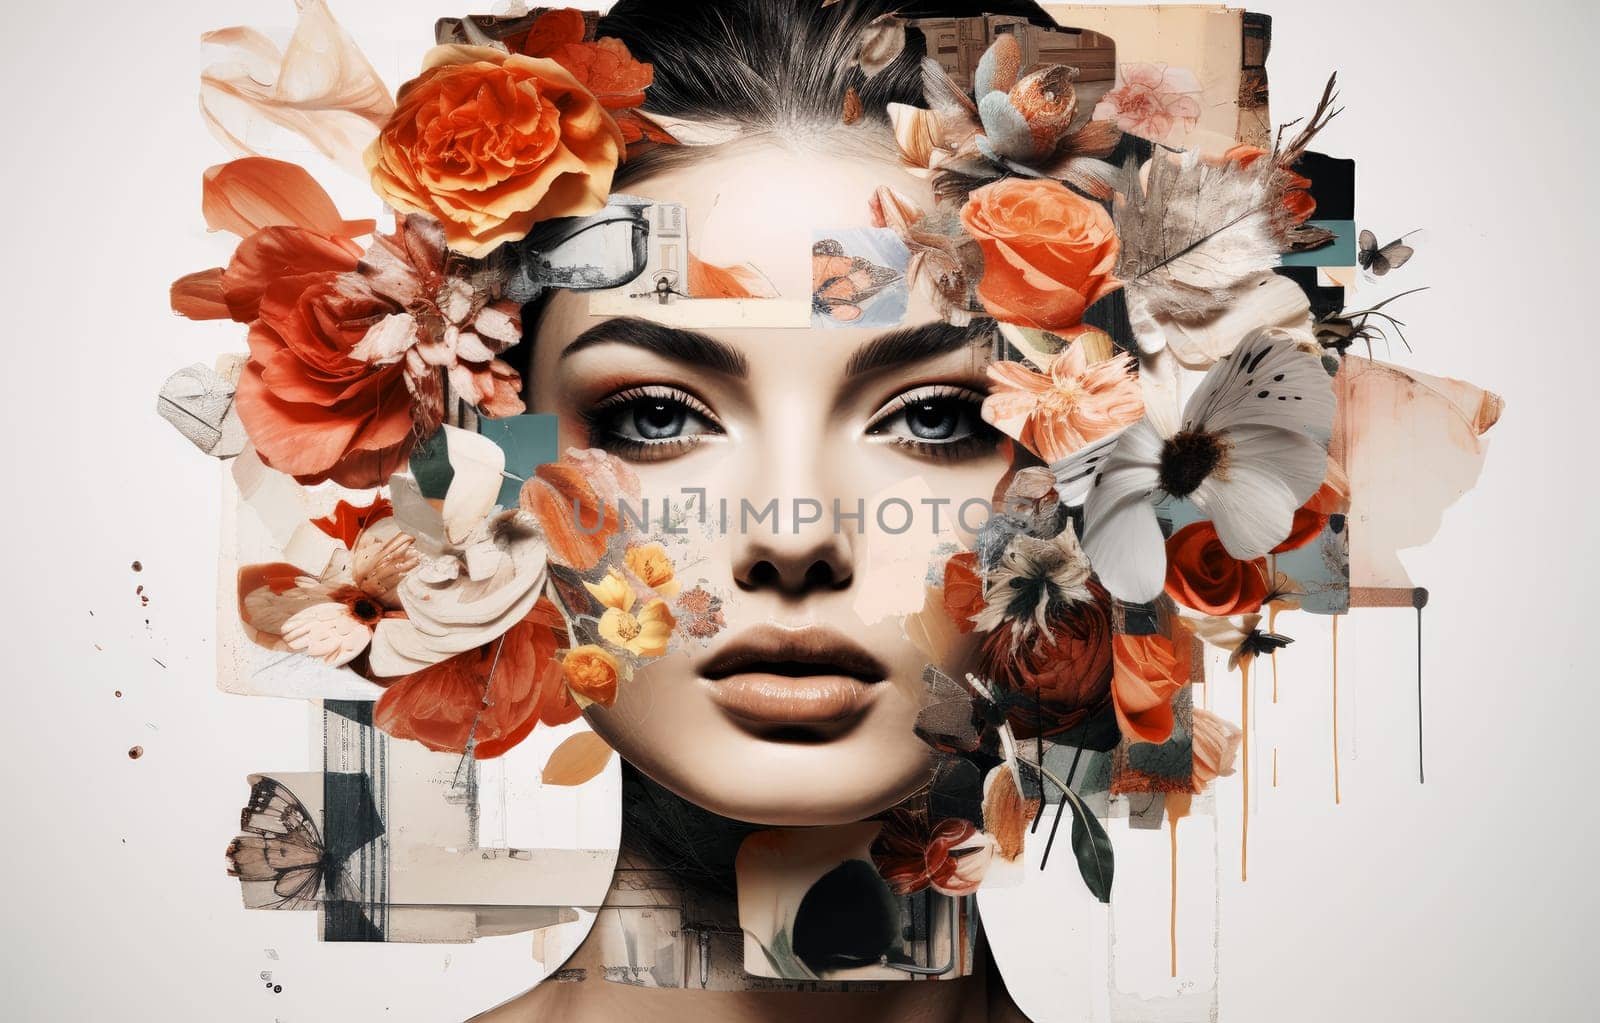 Abstract art portrait of young woman with flowers decoration comeliness